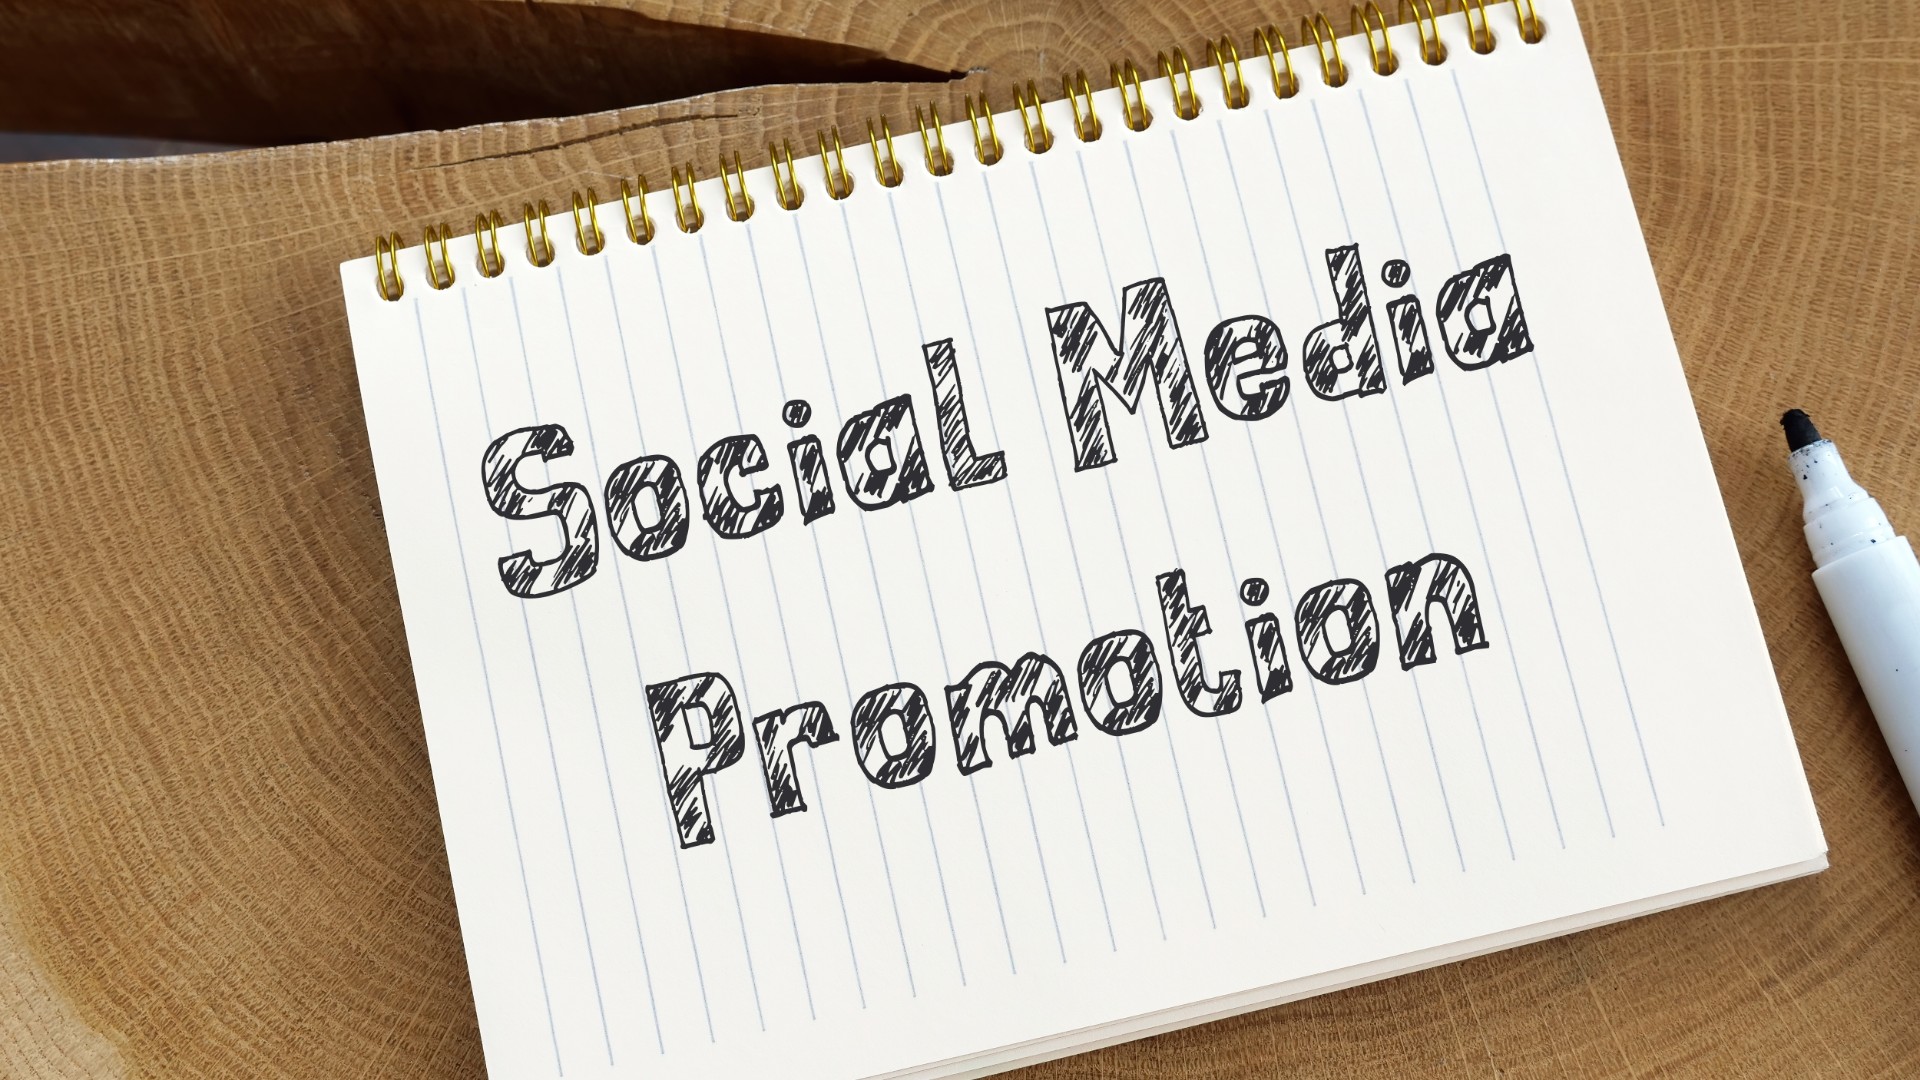 Notebook that says "Social Media Promotion"